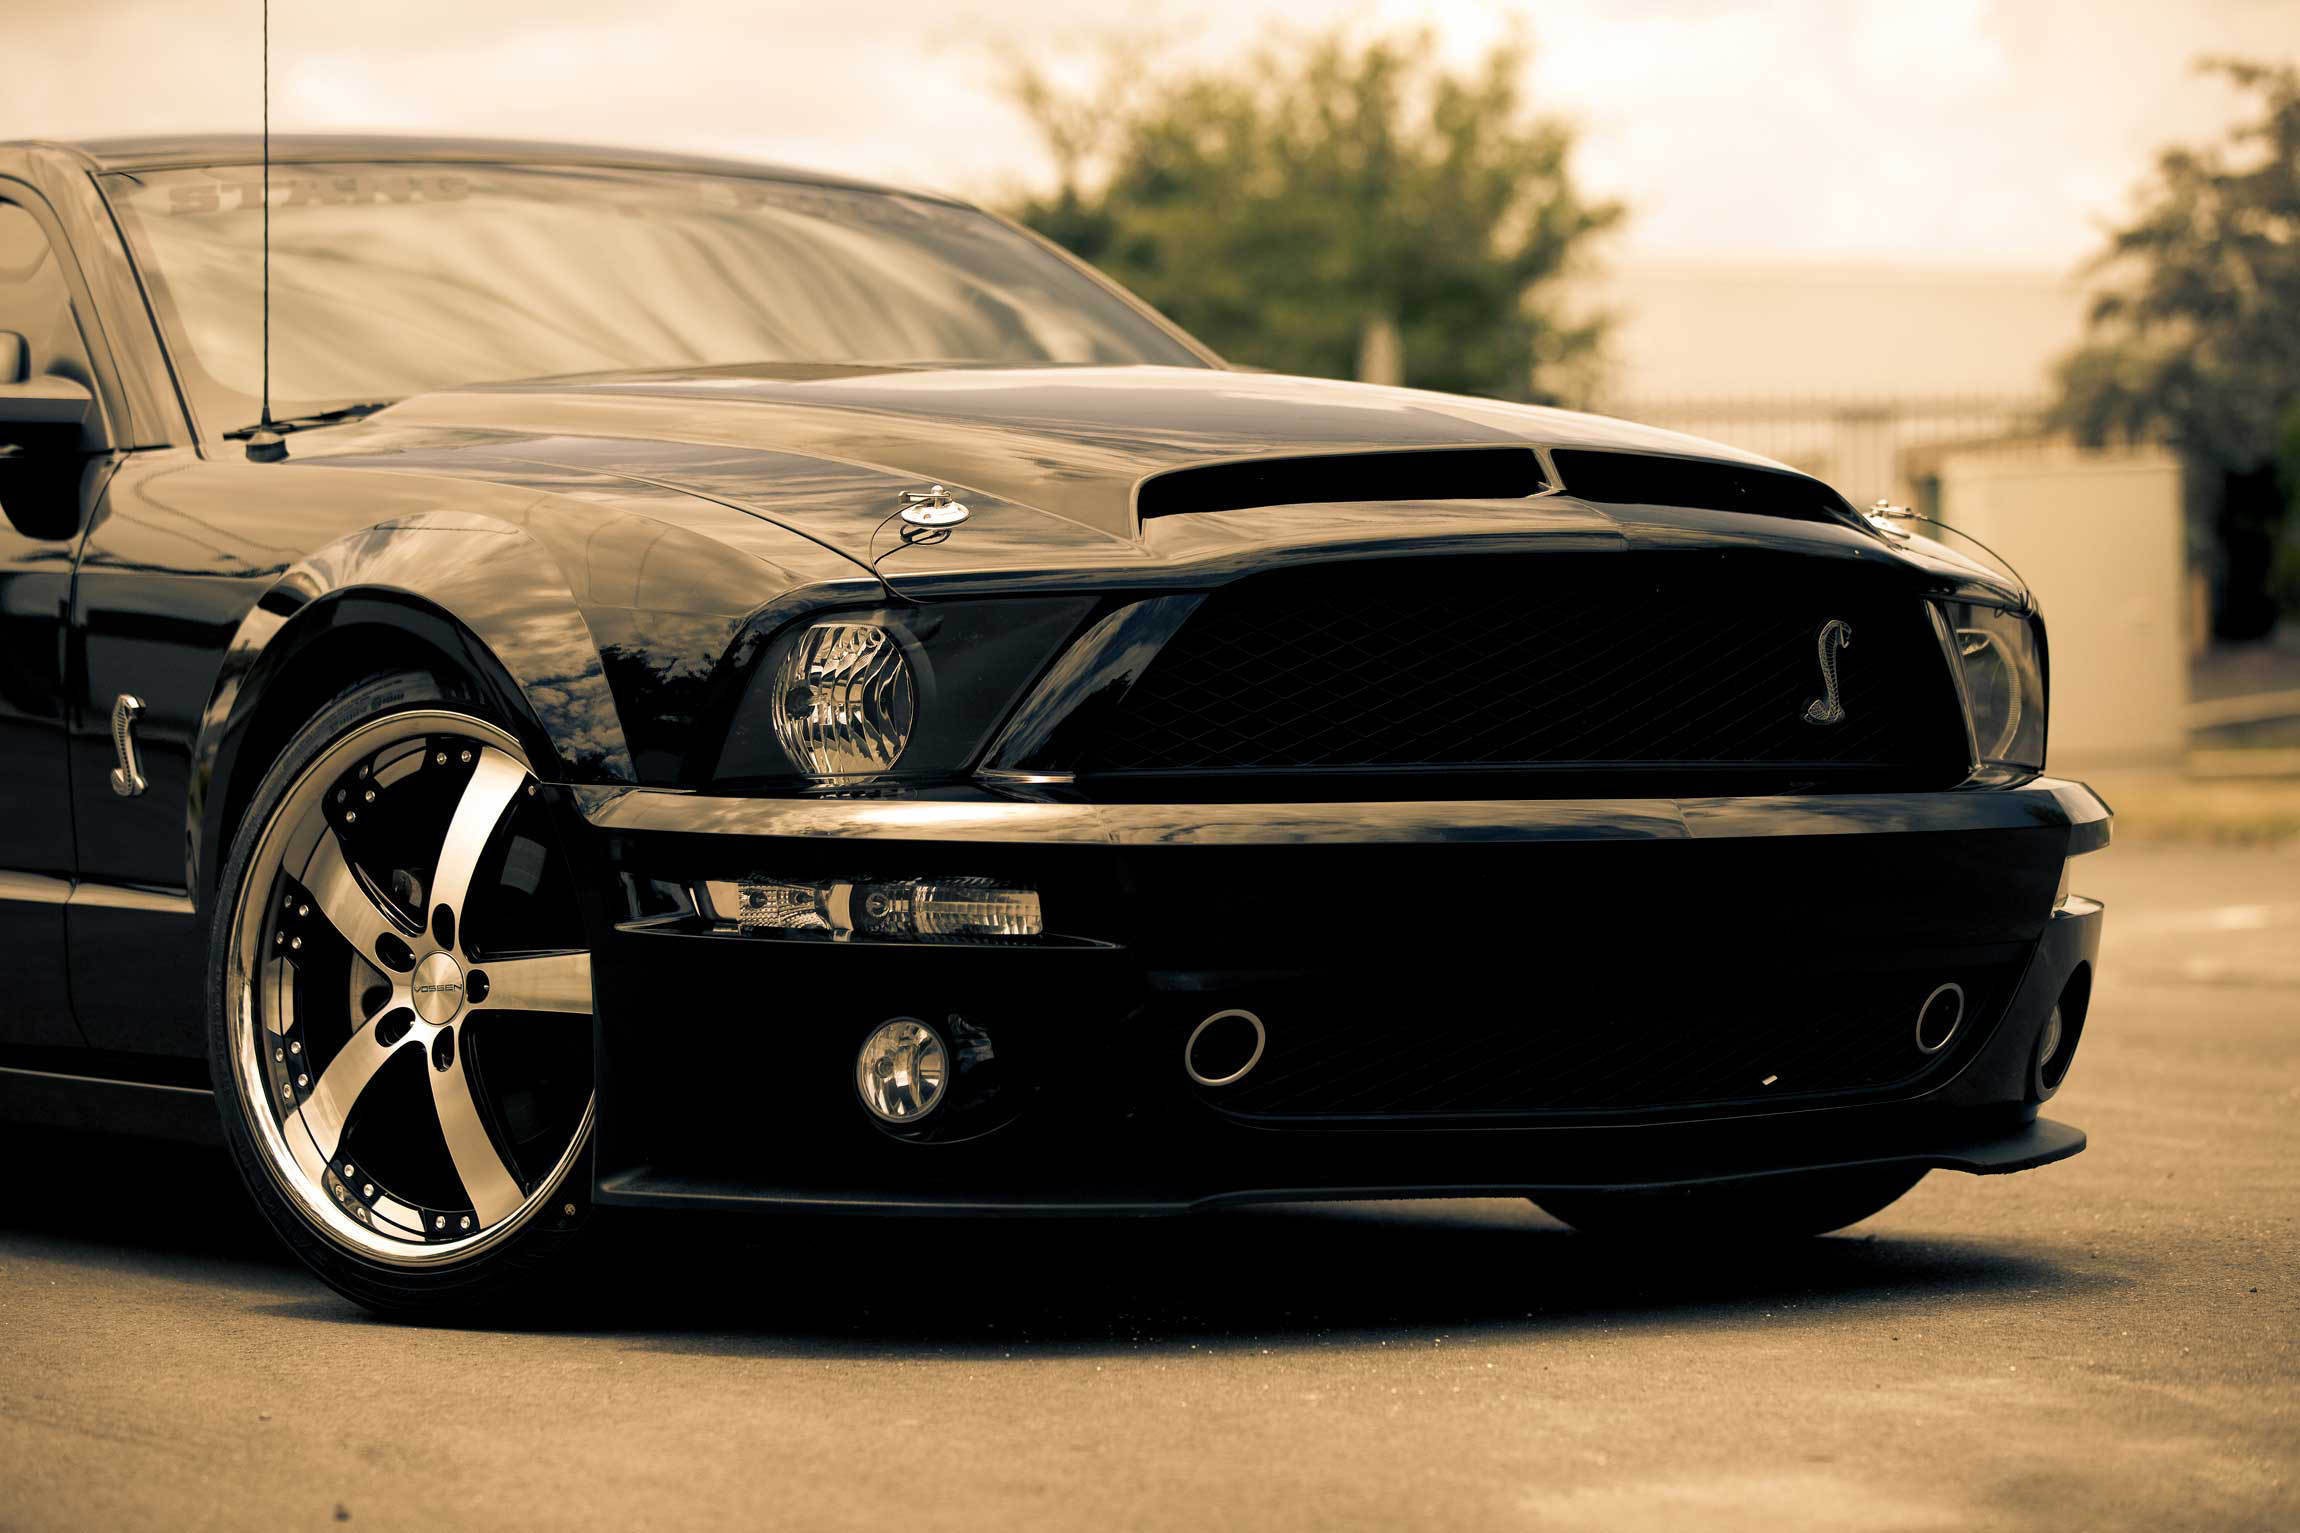 Ford Mustang Wallpaper Hd Download